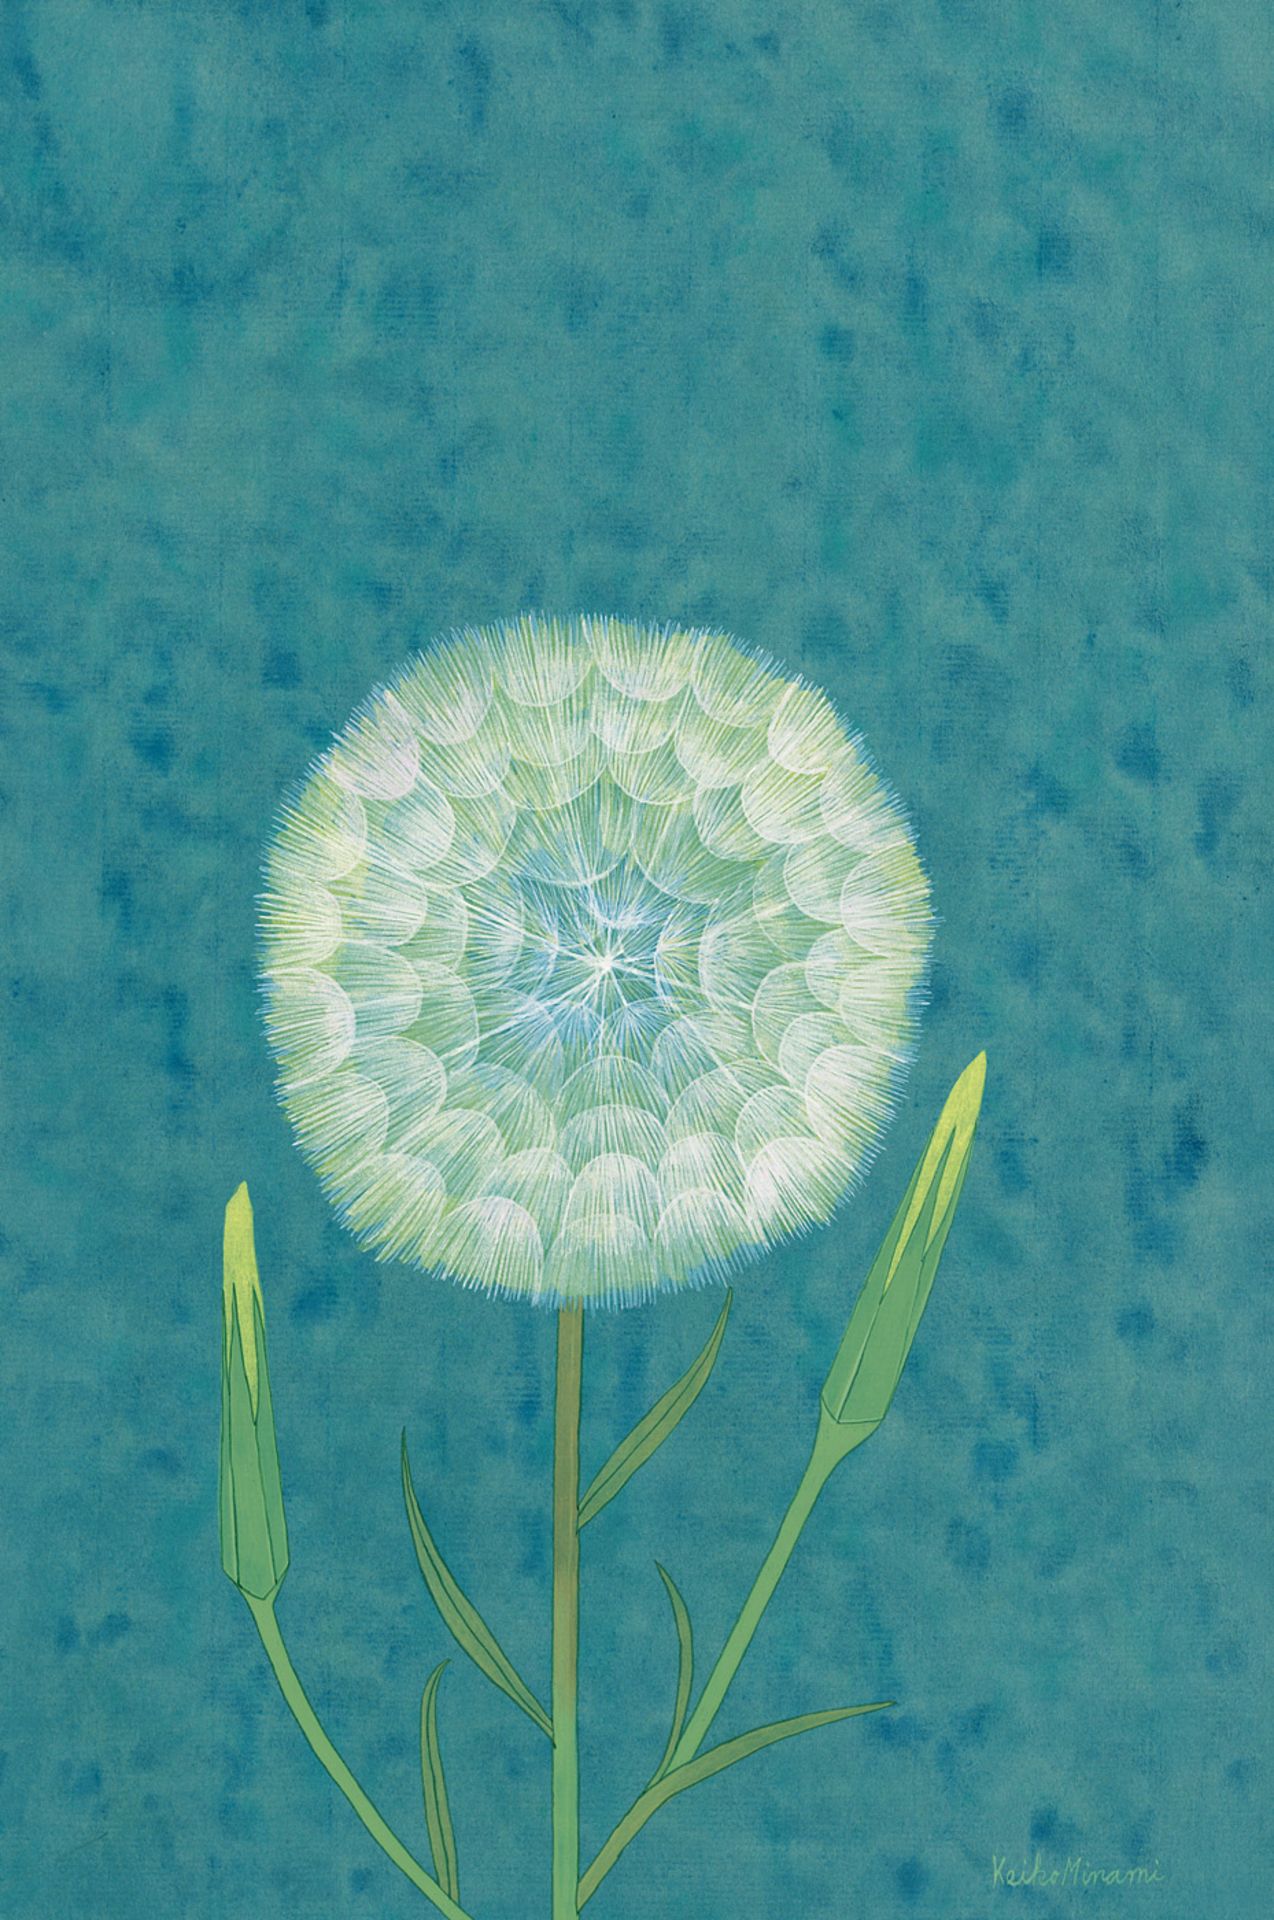 Pustule (Dandelion) Watercolor on grey laid paper.  43,8 x 29,3 cm. Signed with brush in light green